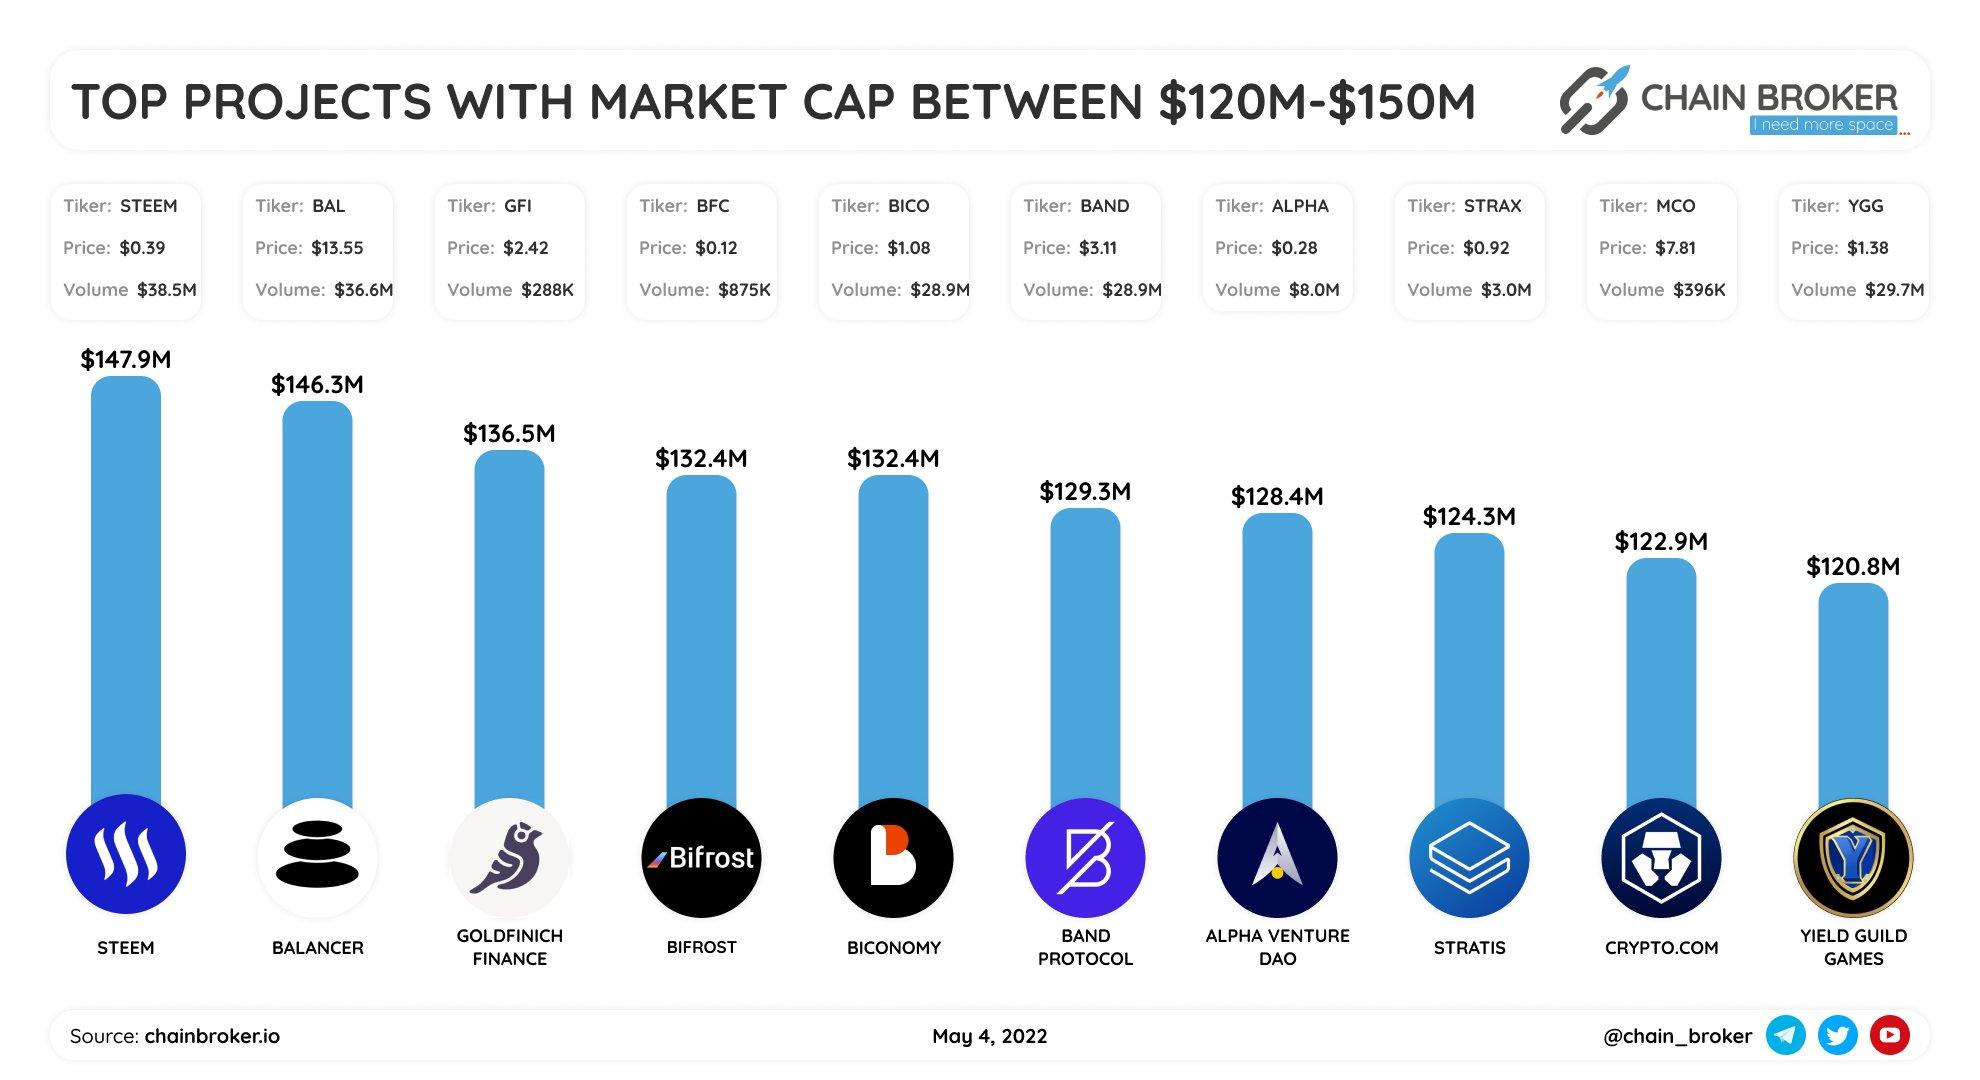 Top projects with Market Cap $120M - $150M